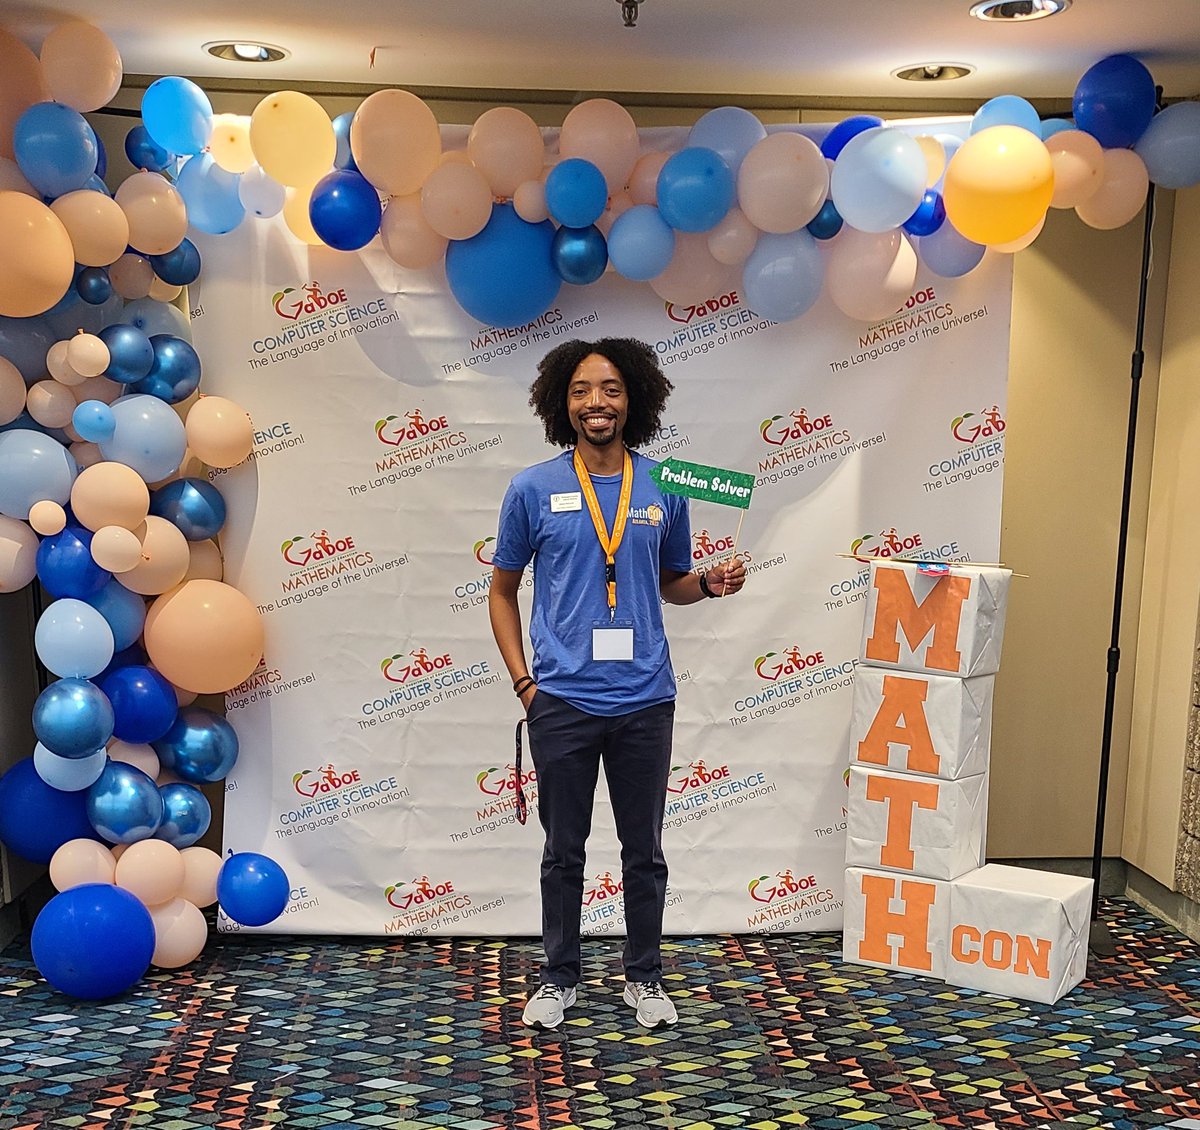 Day 1 (7/11/2023) of #MathCON2023 was great! I enjoyed everything from serving as an ambassador to attending sessions. The @GaDOEMath and @GaDOE_CS team made sure that we had a great start to #GaDOEMatHCON.